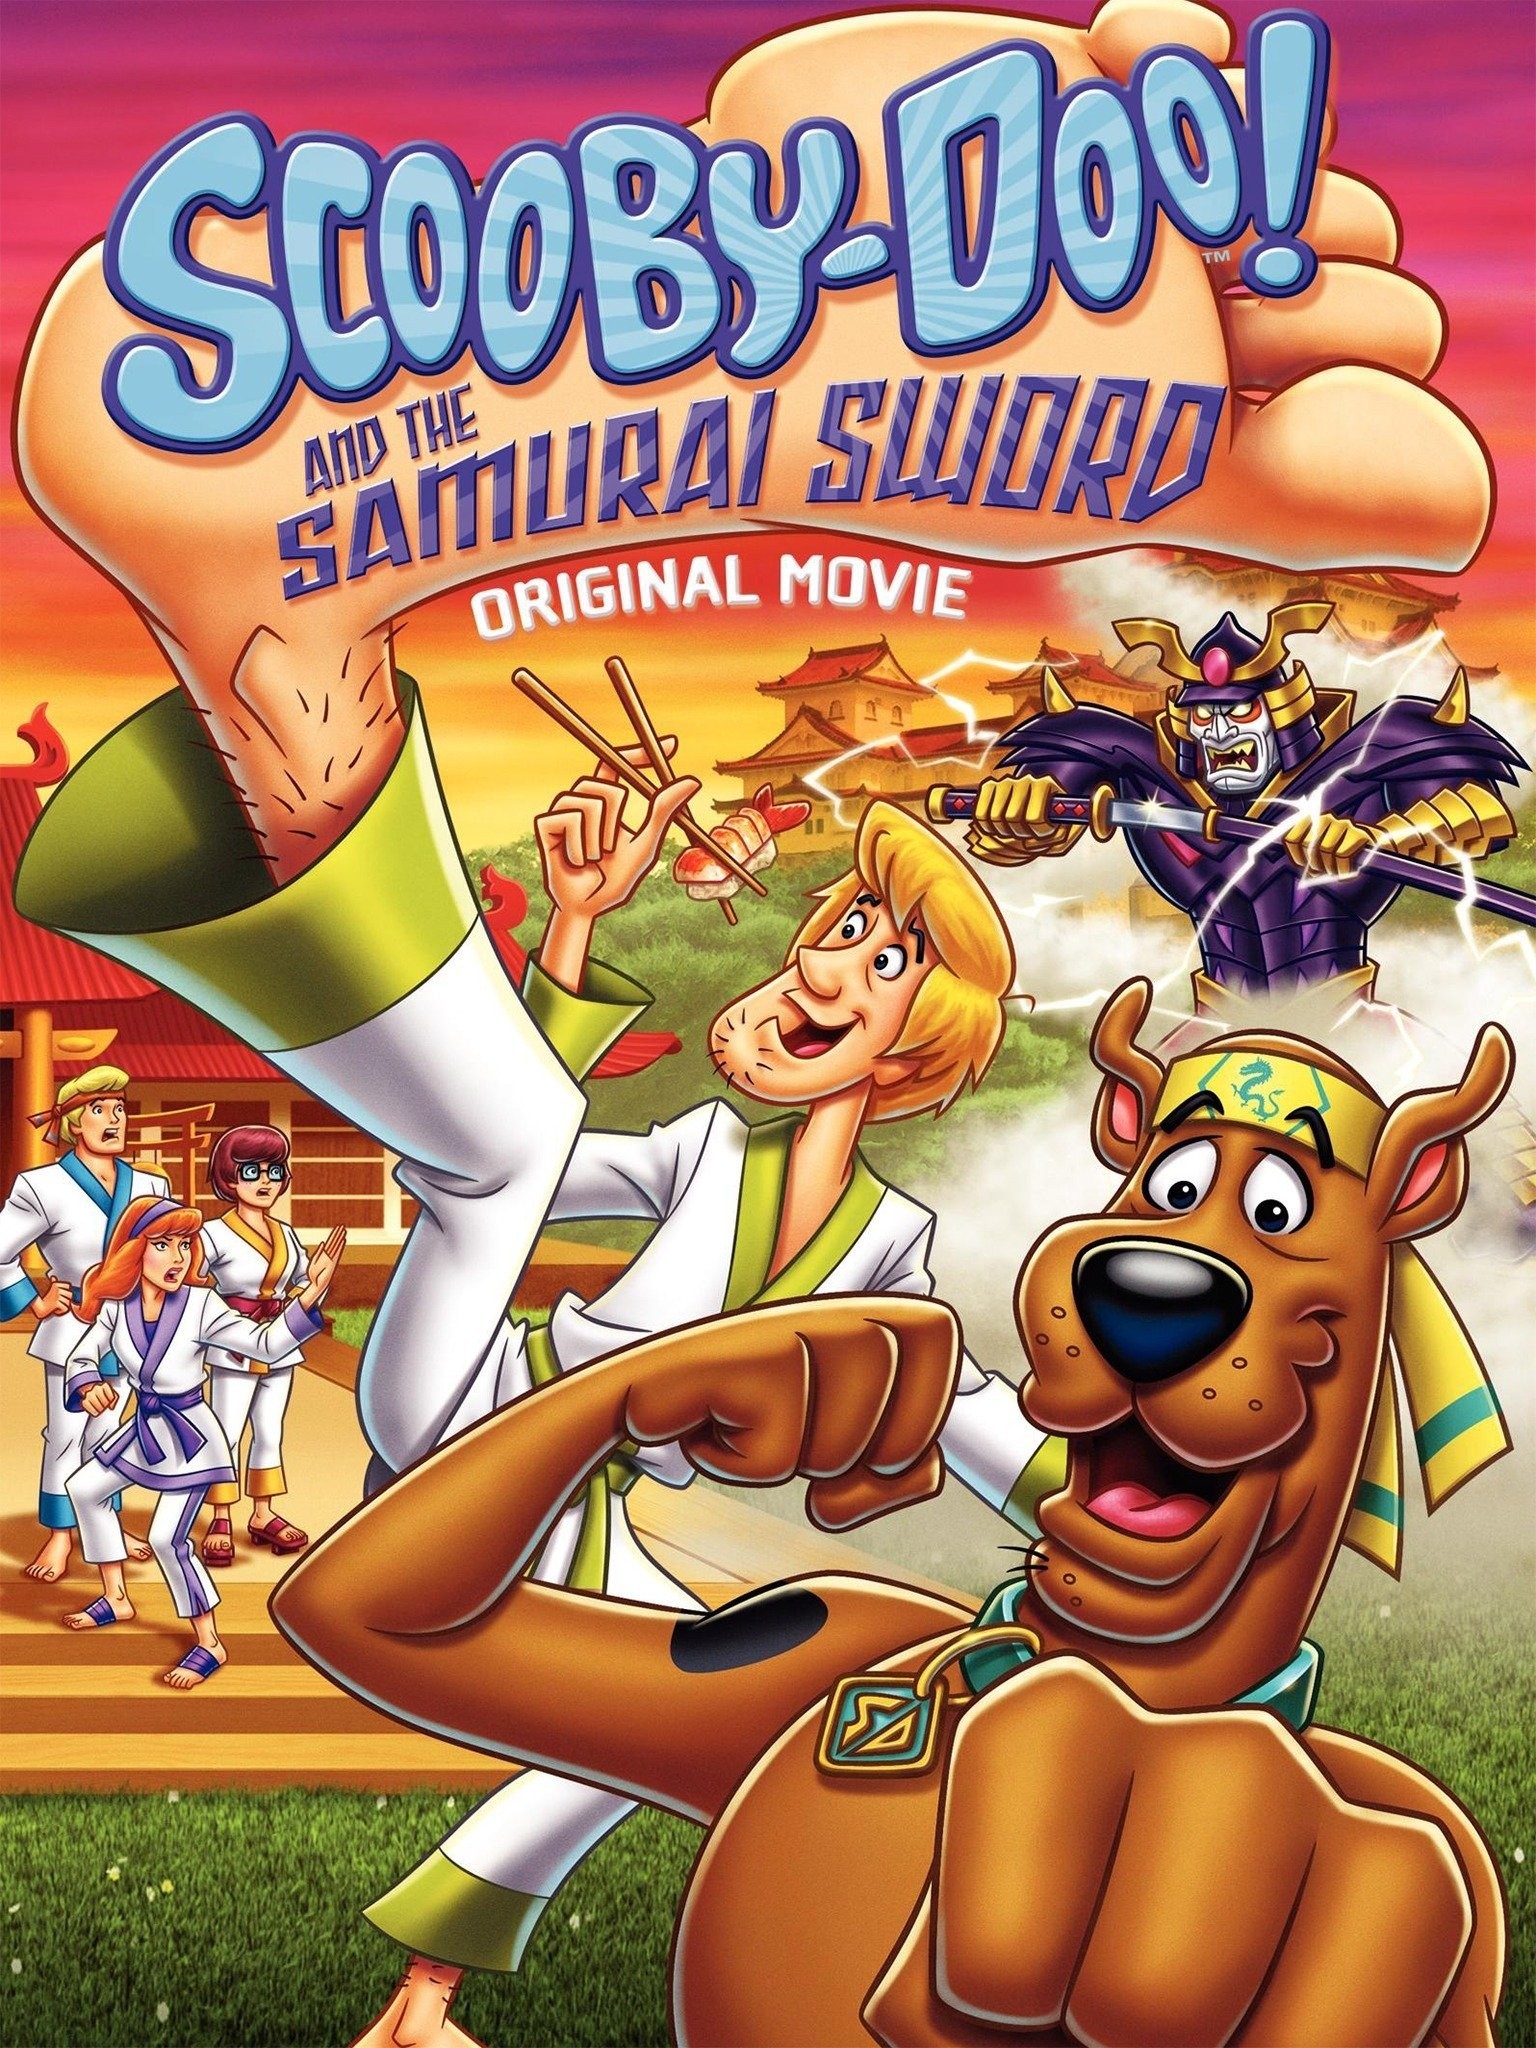 Watch Scooby-Doo! The Sword and the Scoob!